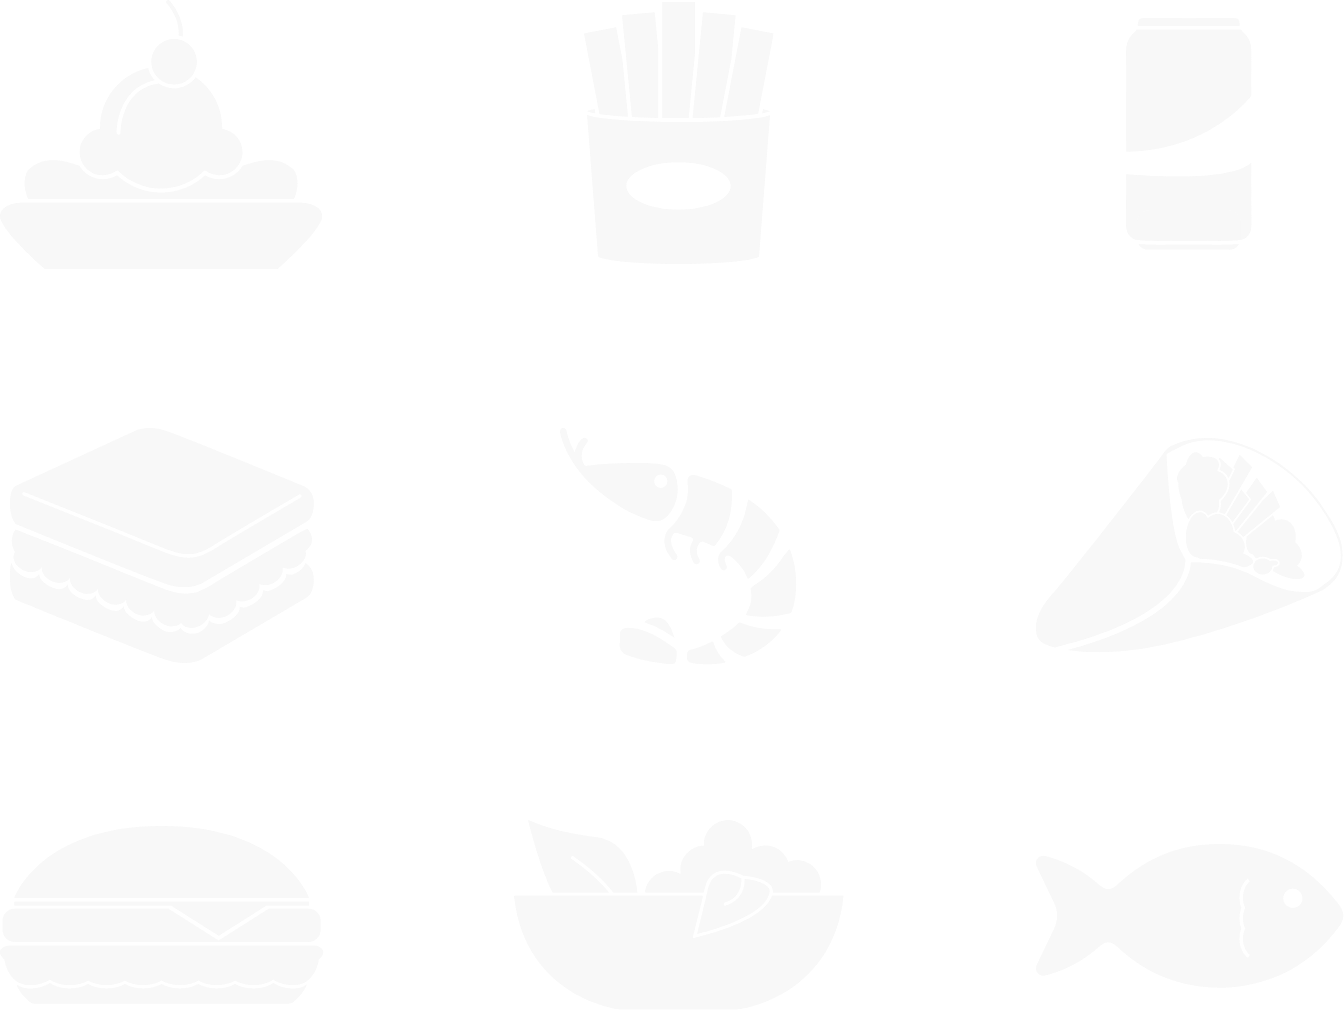 Fins-icons-3